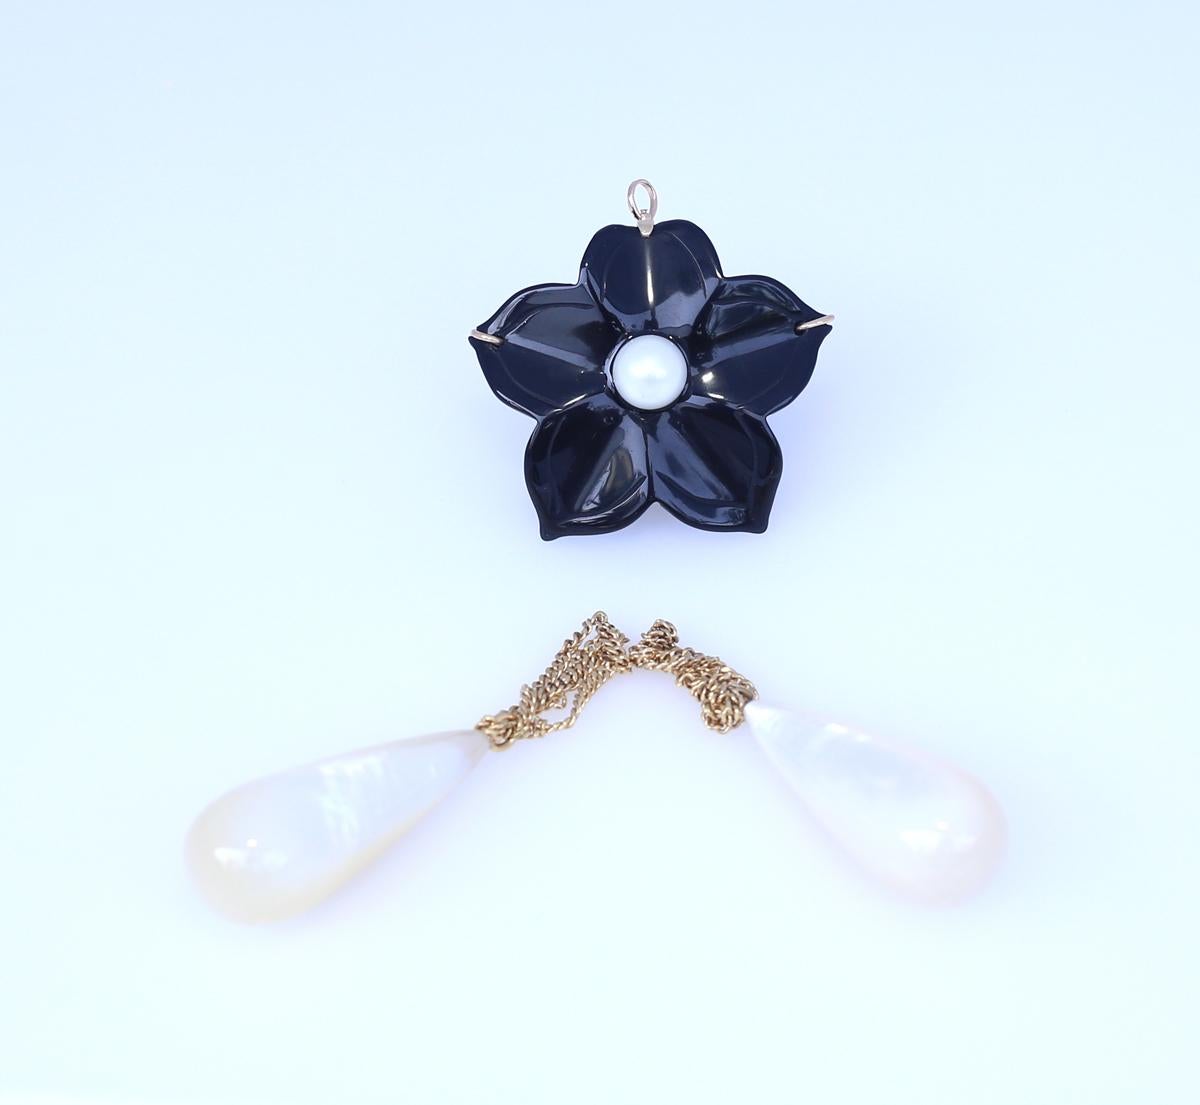 Onyx flower with two detachable Mother-of-pearl pendants. 14K Gold.  1930.
Really fine and stylish item. It can be worn as a brooch or as a pendant. There is a special loop on the back for the chain. Can be separated from the two mother-of-pearl